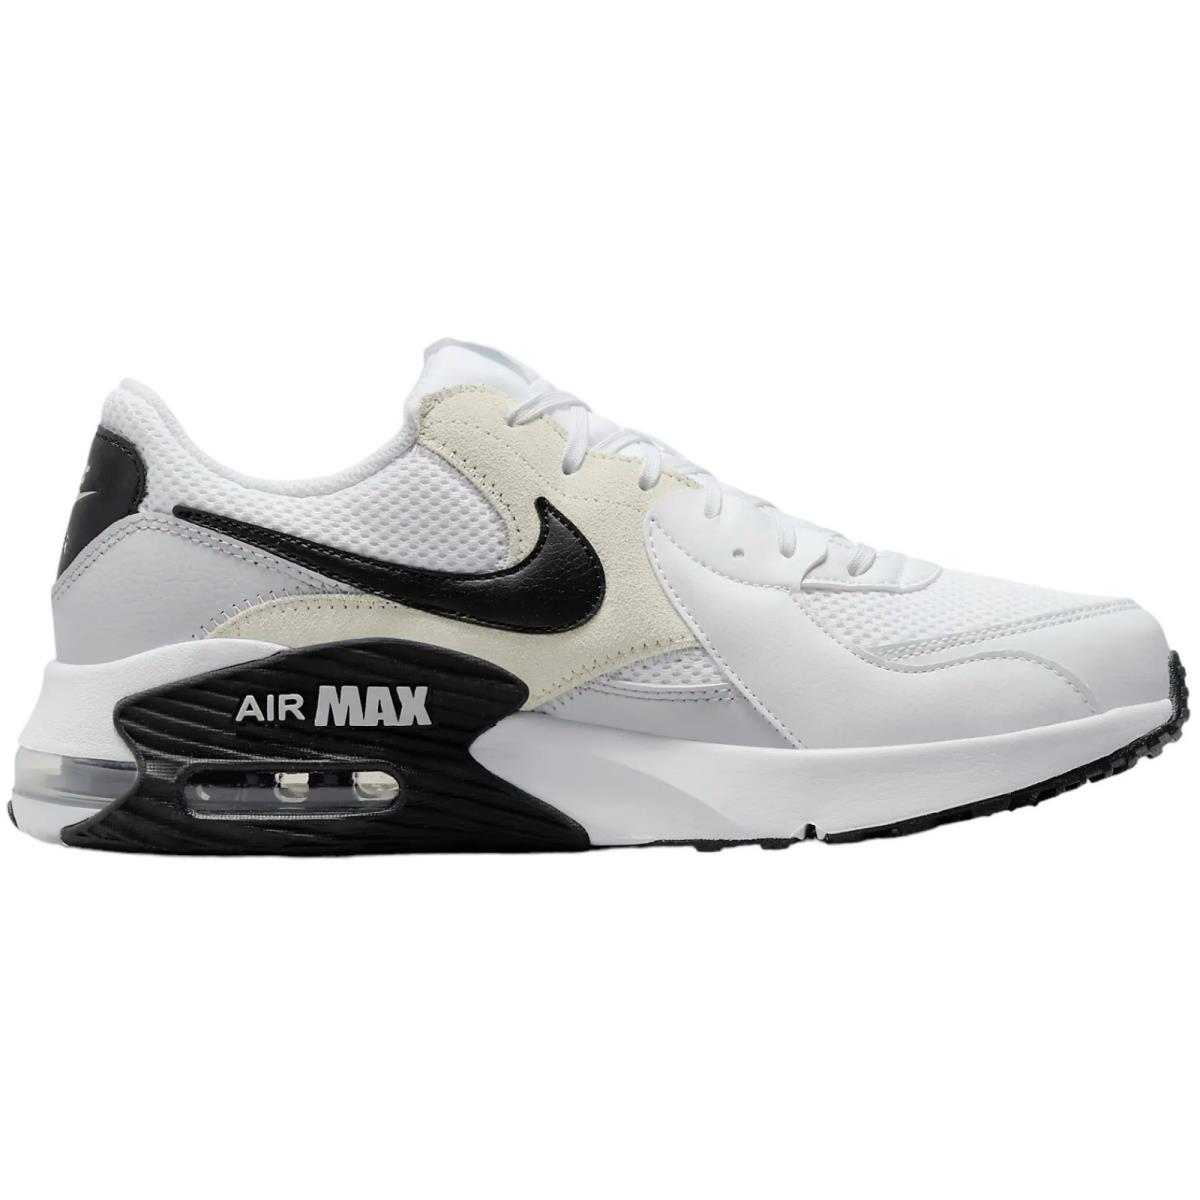 Nike Air Max Excee Men`s Casual Shoes All Colors US Sizes 7-14 White/Pure Platinum/Black 2